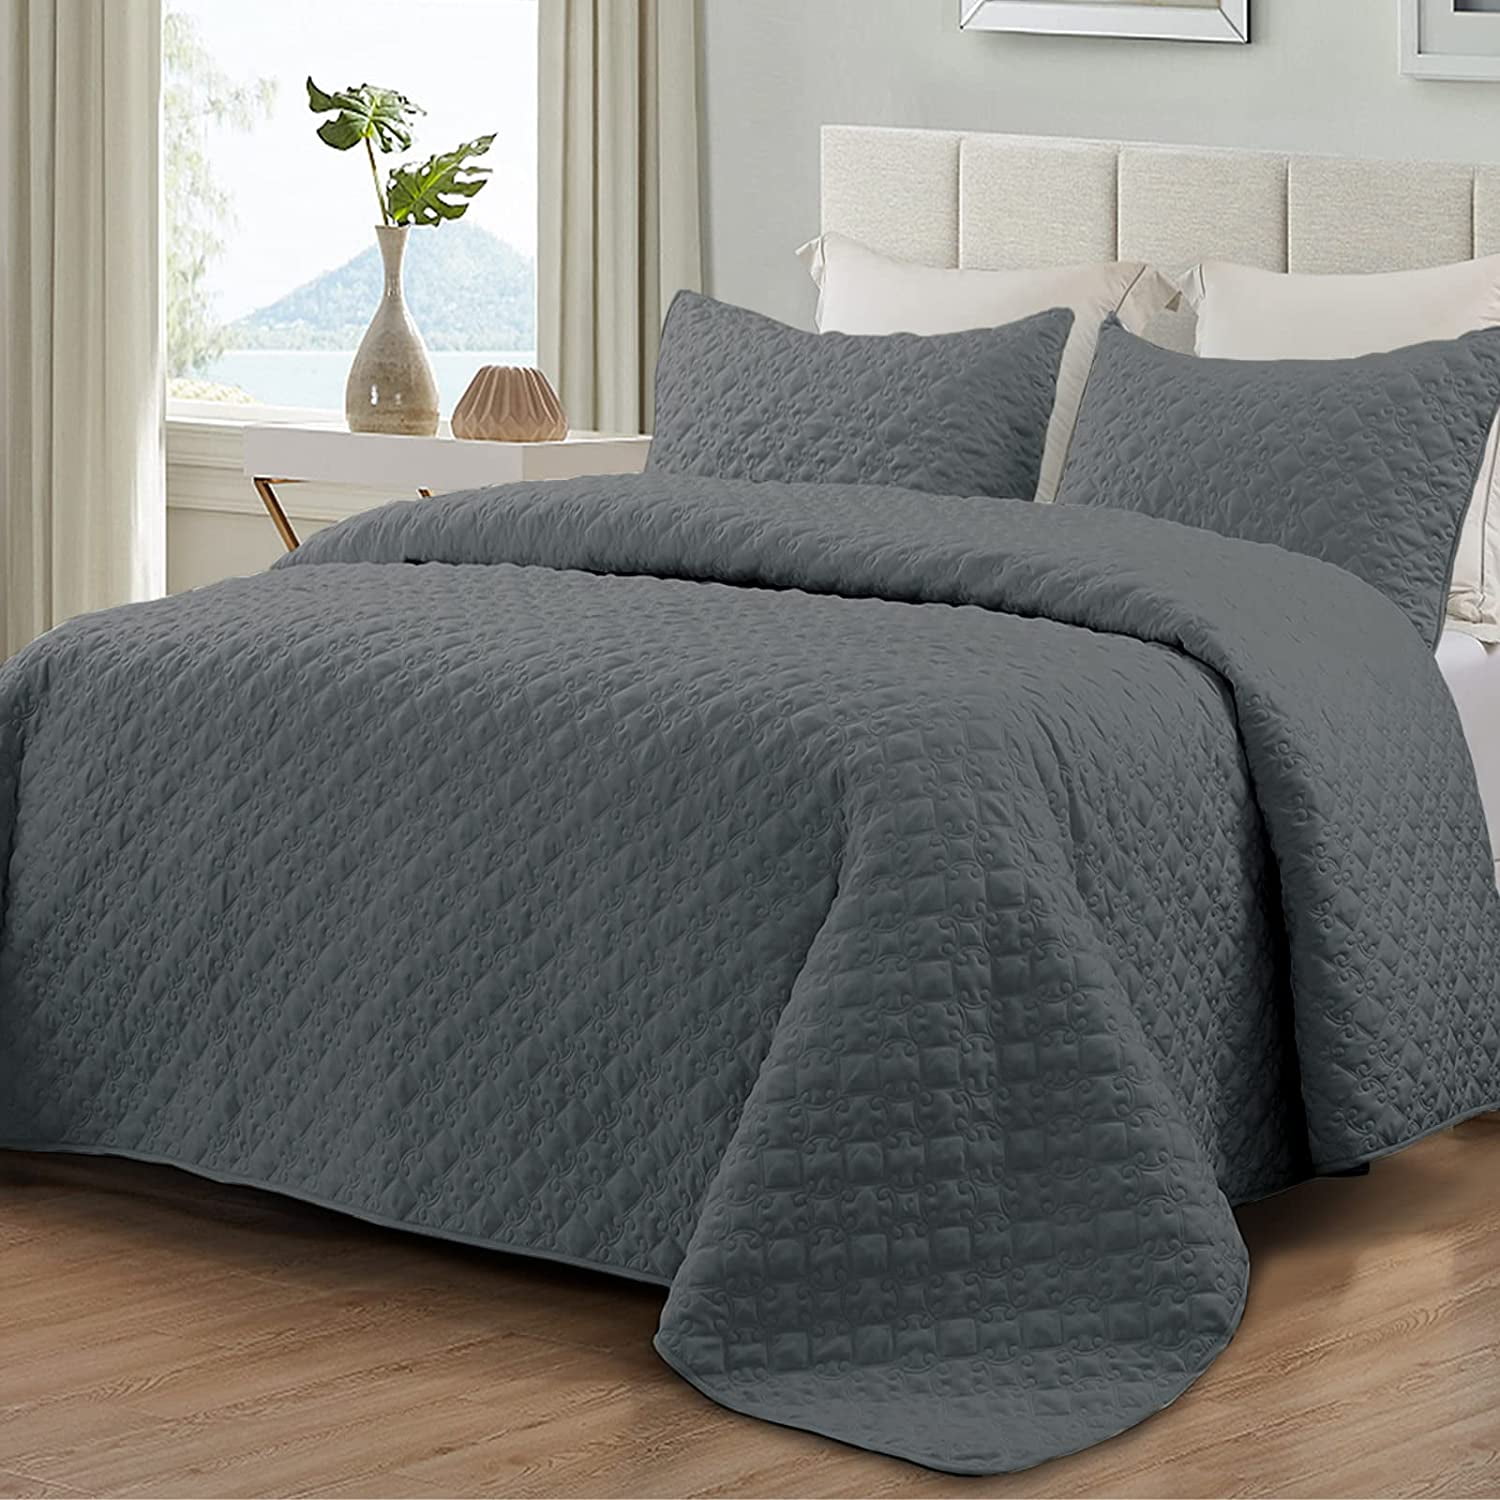 Microfiber Stain and Water Resistant Diamond Quilt Shams - Set of 2 